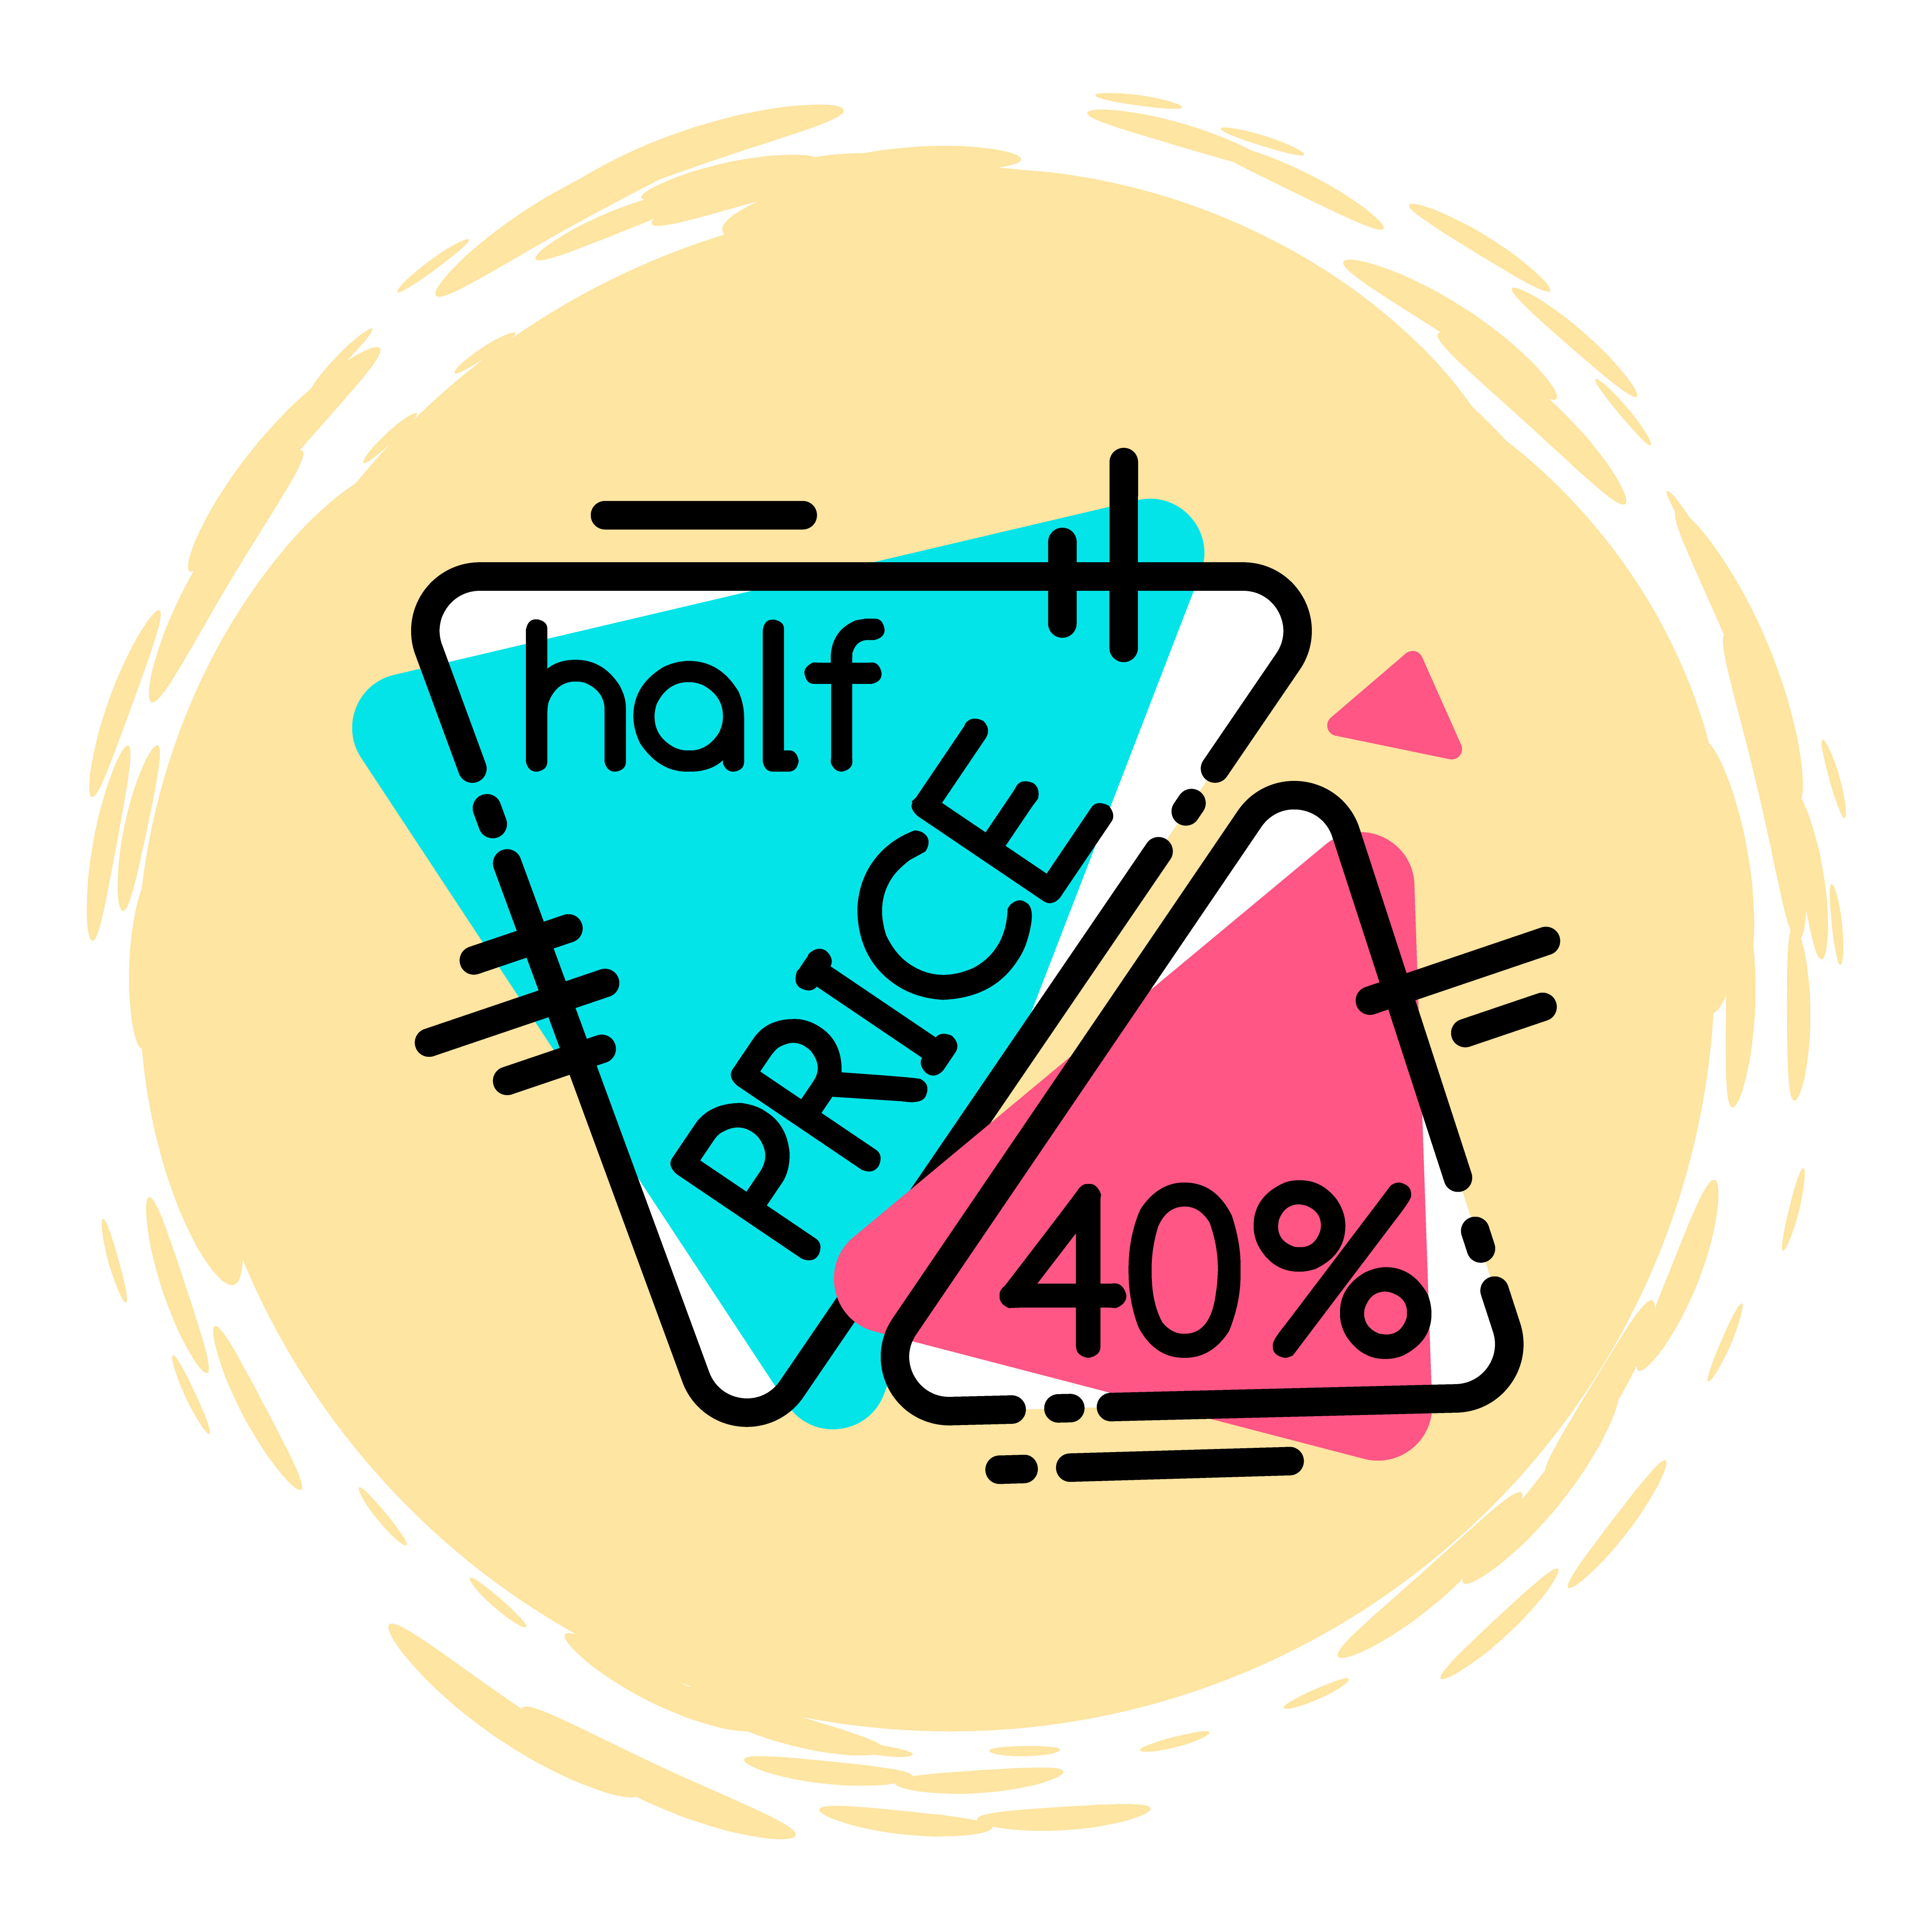 Half price discount and 40 percent off isolated triangle on round brush strokes. Vector illustration of hand drawn circle price off label with painted elements, memphis style promo sticker frame. Half Price Discount and 40 Percent Off Isolated